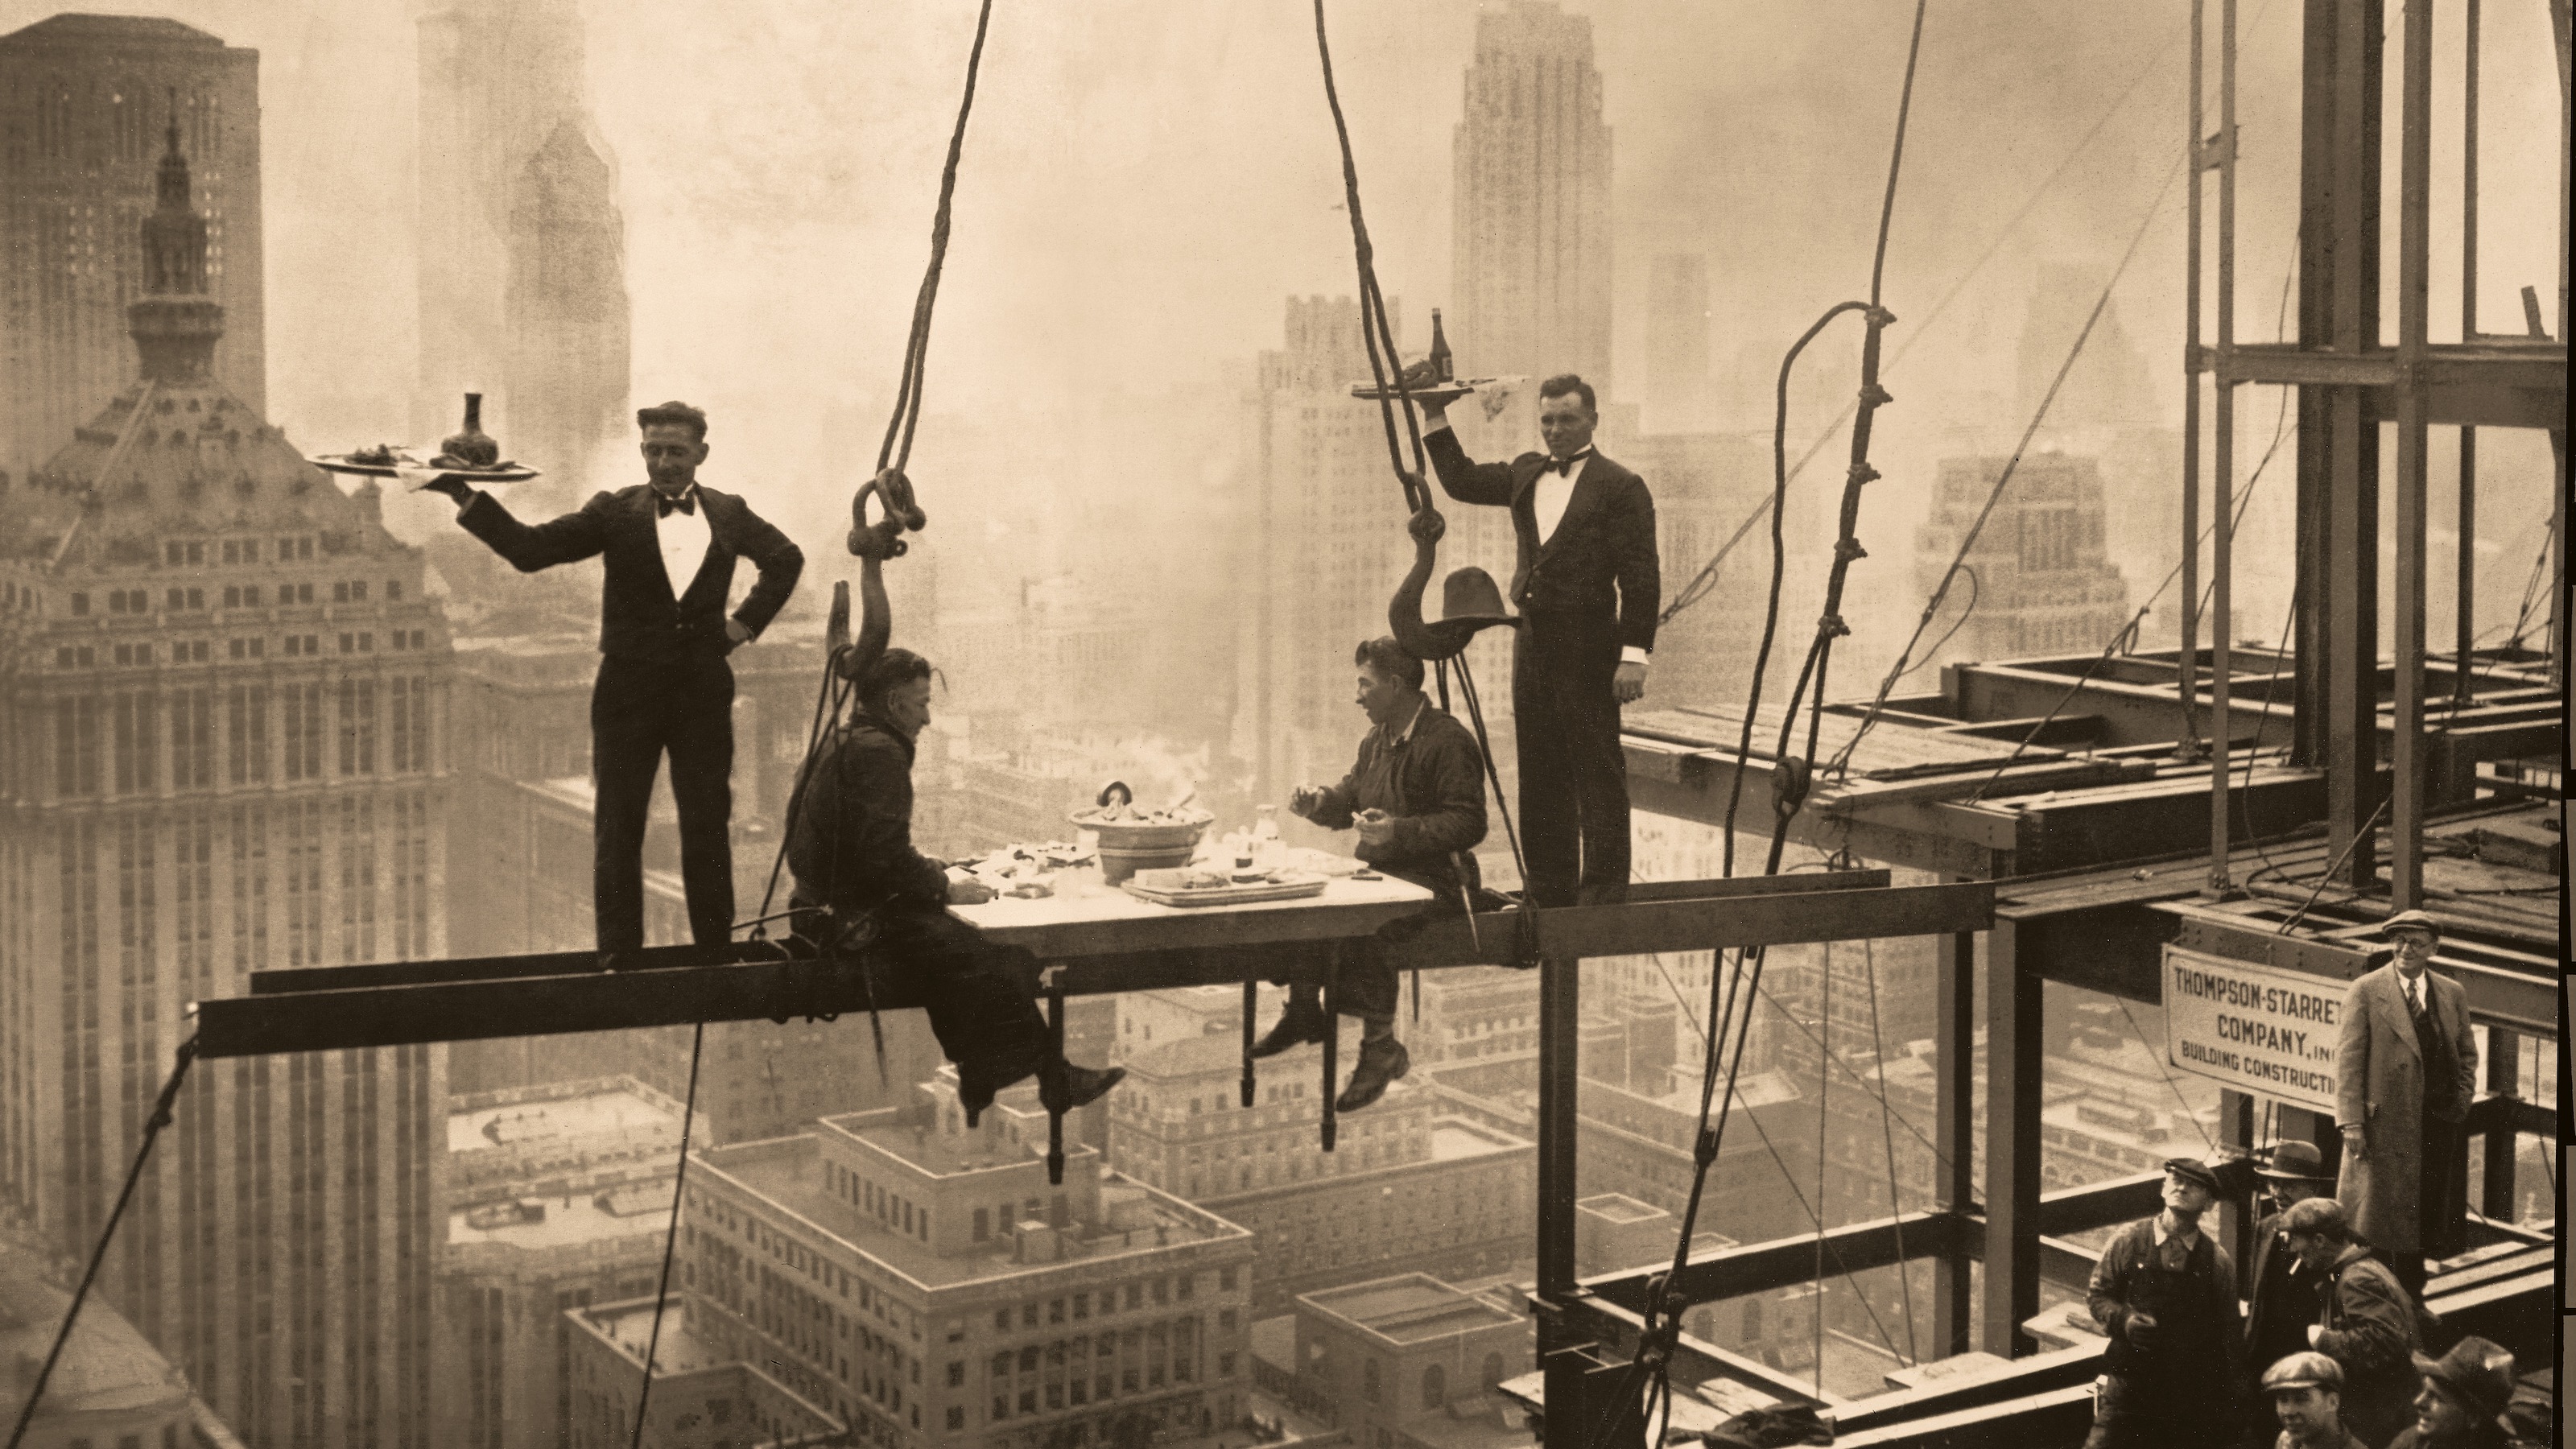 Vintage sepia-toned photo of construction workers having lunch on a steel beam high above a cityscape, with a waiter generously serving them.